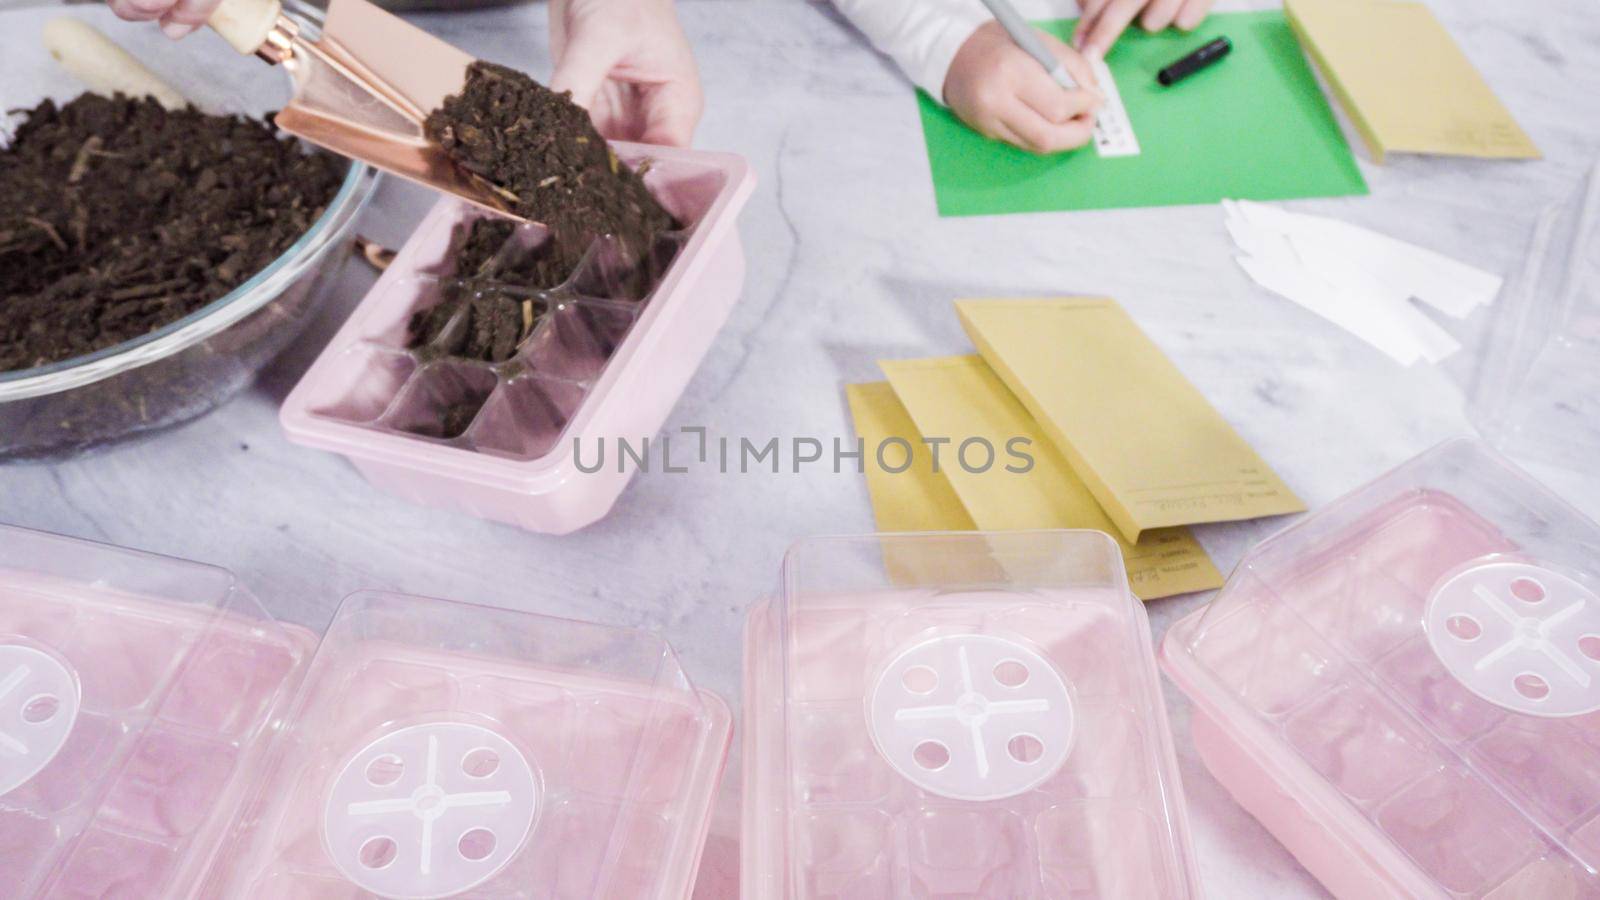 Little girl helping planting seeds in seed propagator with soil.